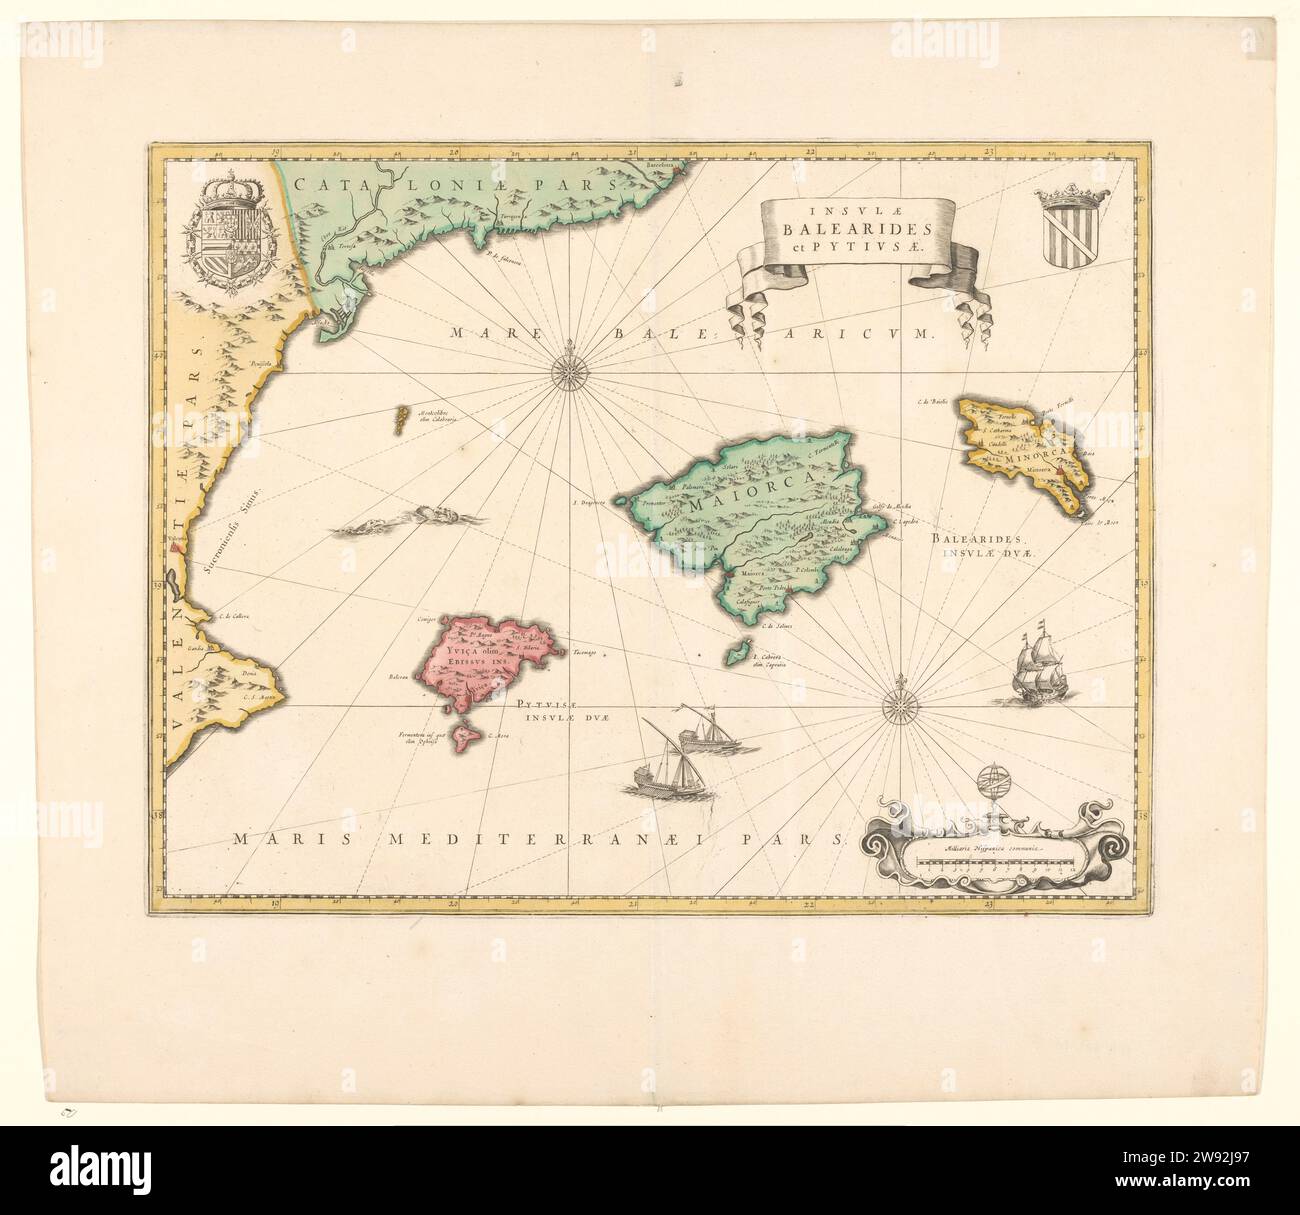 Map of the Balearic and Pityusen and Coast of Spain, Willem Janszoon Blaeu, 1600 - 1650  Map of Balearic Islands and Pityusen and part of the coast of Spain, yellow, areas colored, 2 wind roses: M.B. and r.o. Crowned coat of arms R.B., crowned coat of arms with guilder fleece l.b .. ships in the sea, r.o. Scale in Spanish miles with a globe on it. Inscription; R.B.: Insvlae / Balearides / et Pityvsae. Amsterdam paper engraving maps of separate countries or regions Whale. Spain Stock Photo